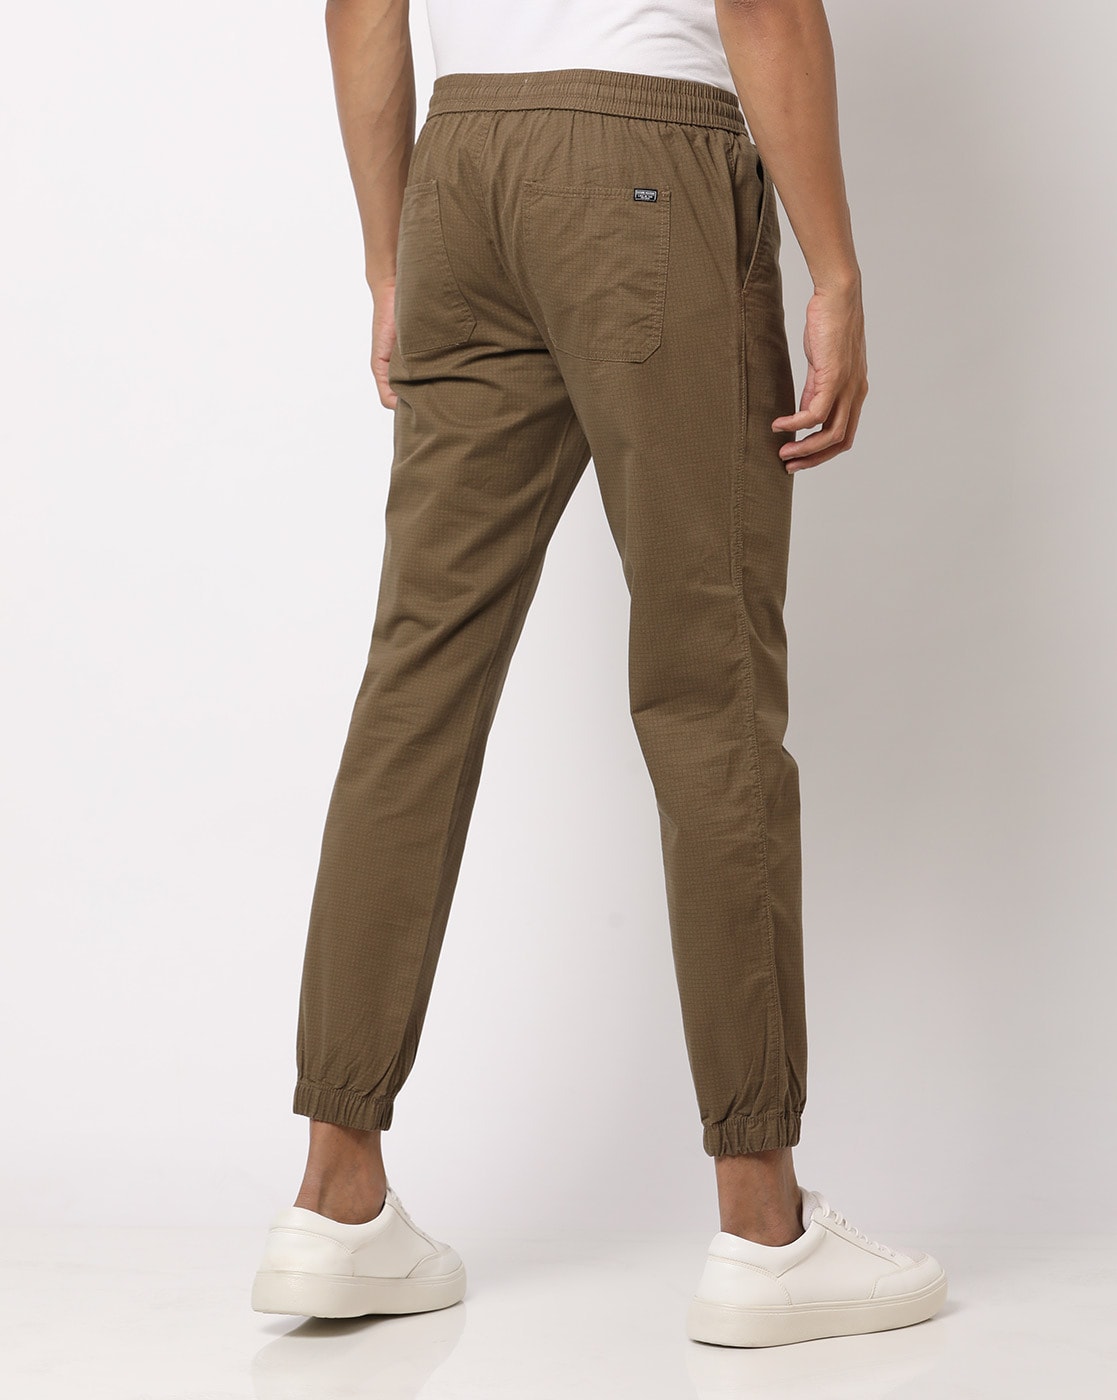 WQ&Energy Men's Formal Comfort Casual Pant Plus Size Hipster Chino Pants  Khaki 34 : Amazon.in: Clothing & Accessories